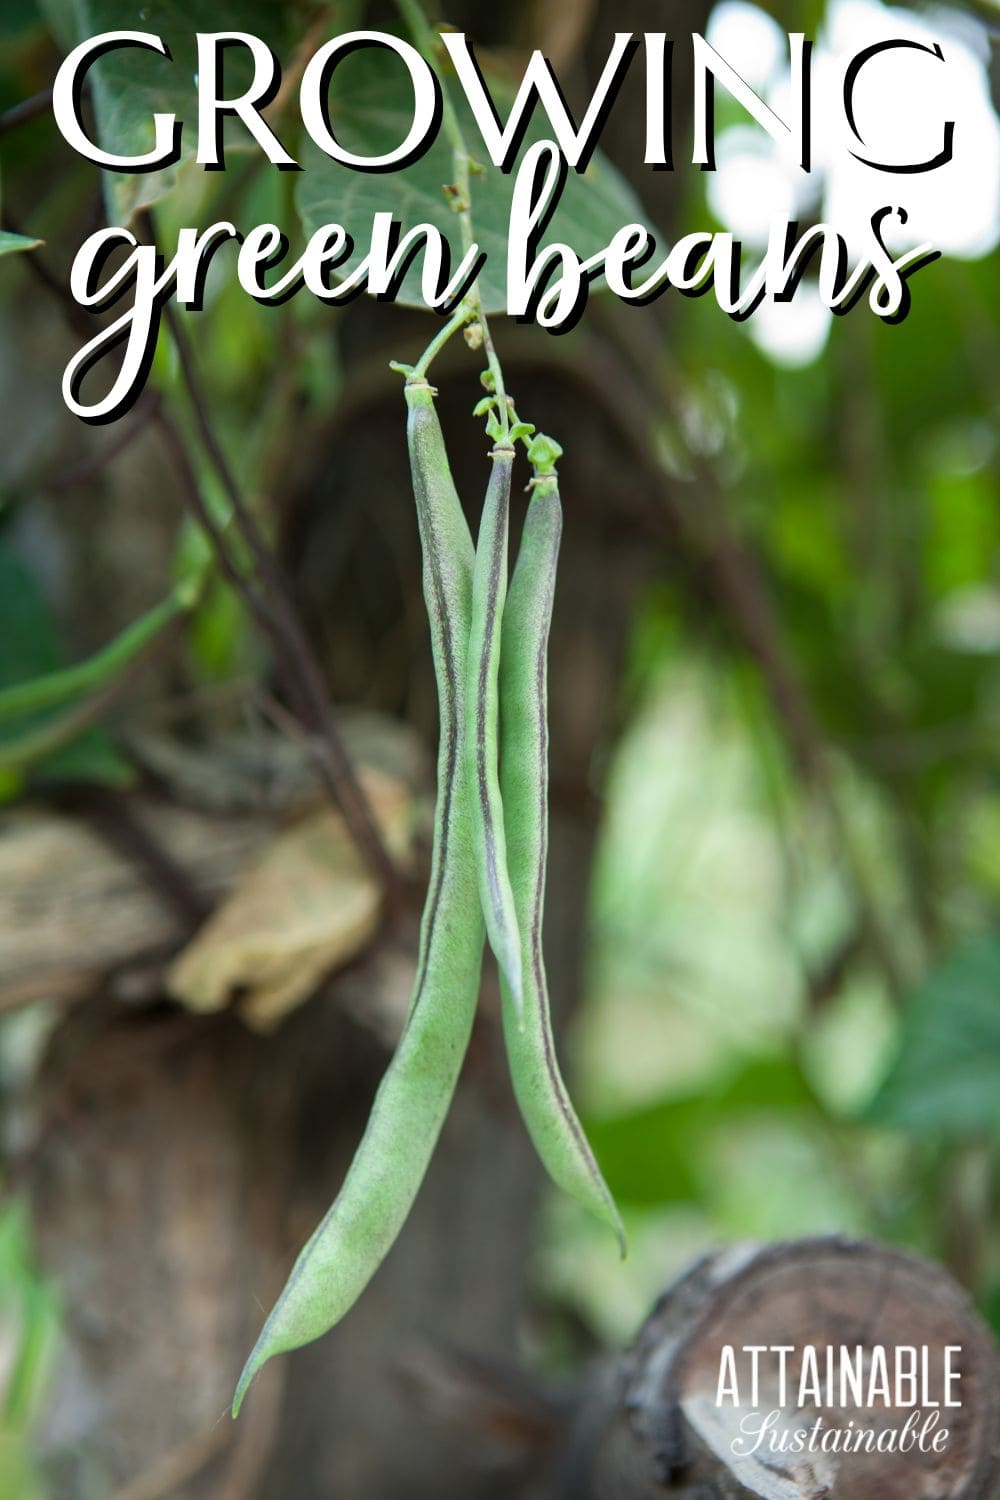 three green beans growing on a plant.